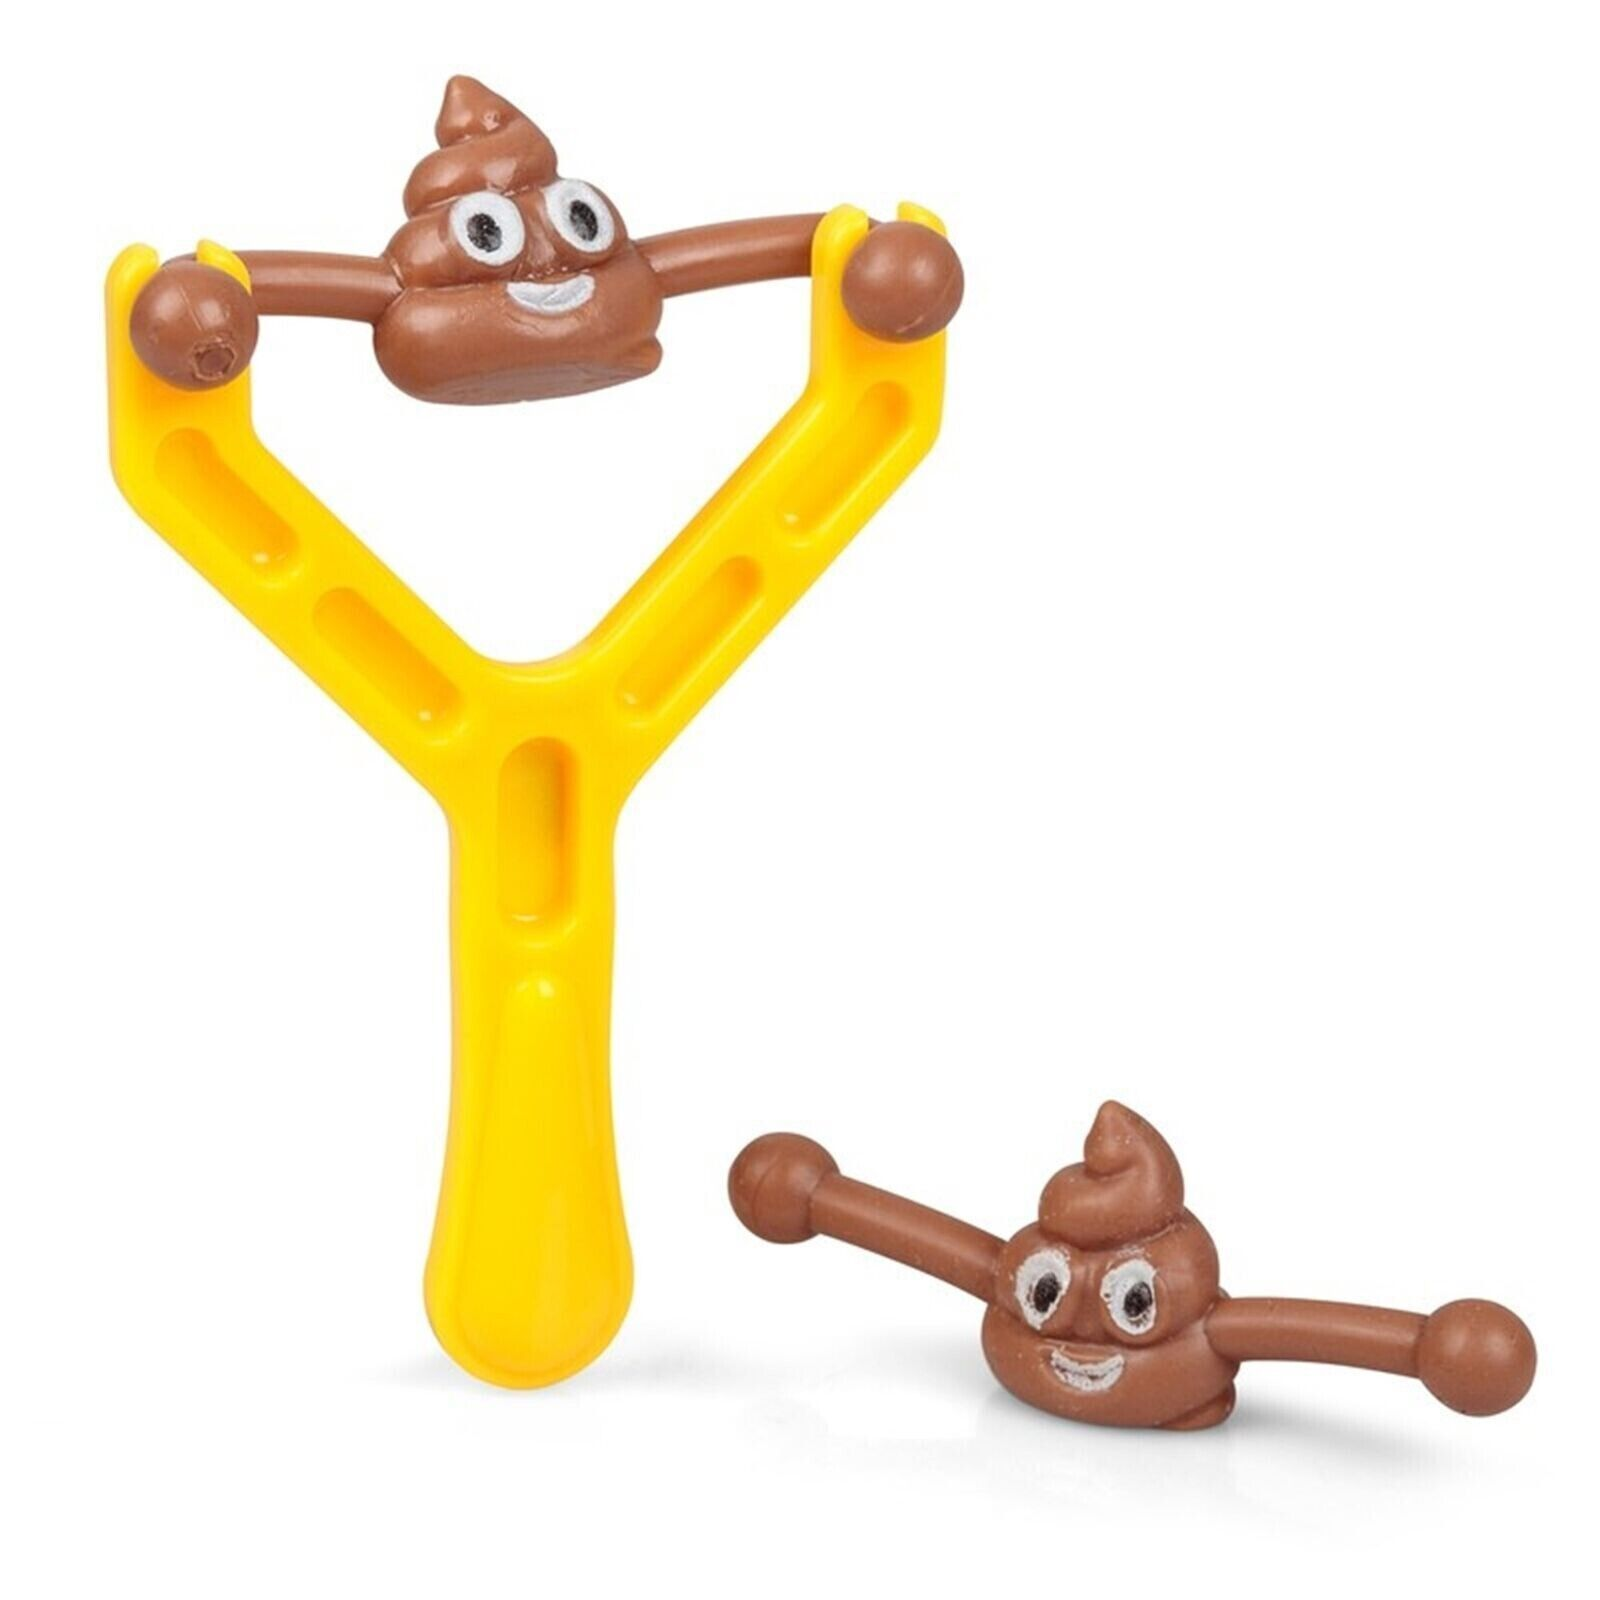 (🌲Early Christmas Sale- SAVE 48% OFF)Smiley Poo Slingshot-buy 5 get 5 free & free shipping(10pcs)